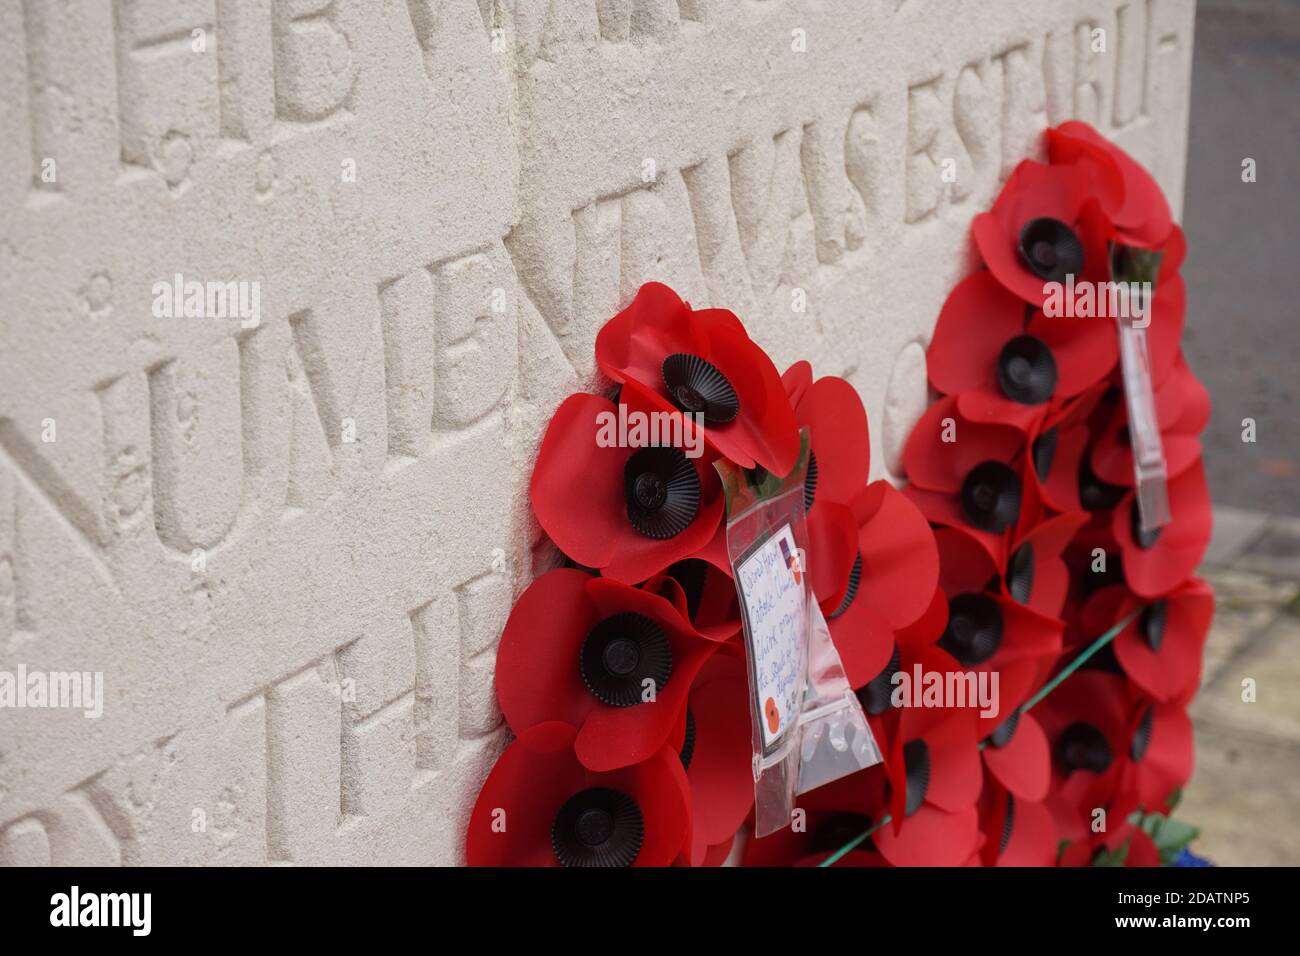 Remembrance day poppy wreathes on a war memorial to commemorate fallen servicemen in past conflicts Stock Photo